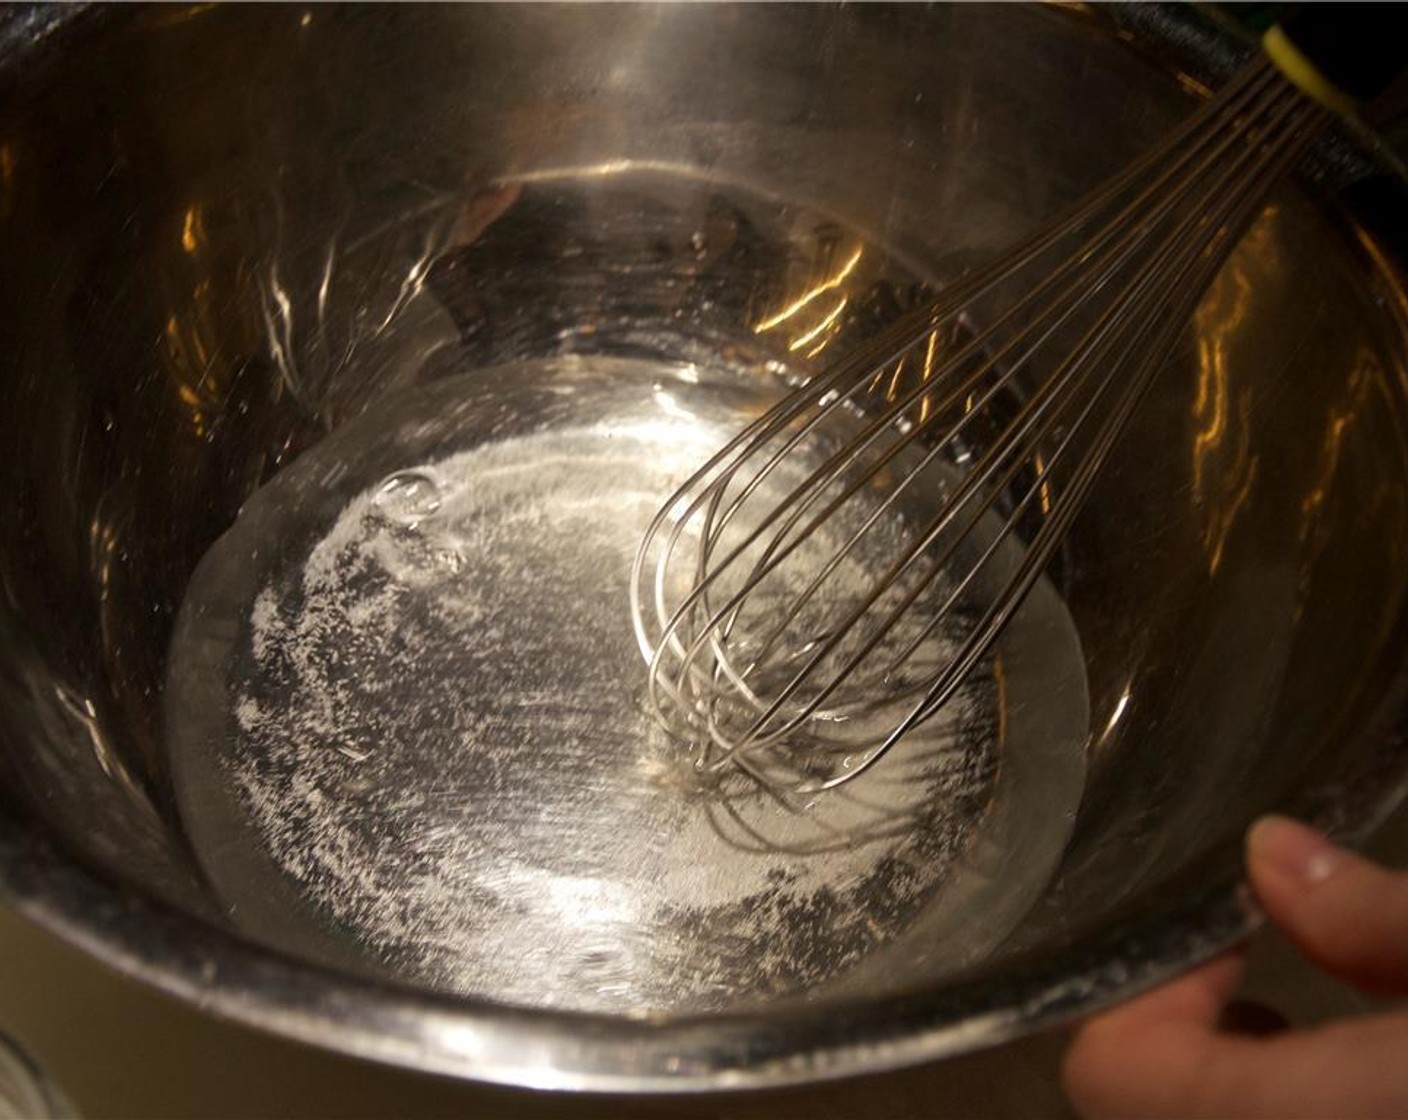 step 6 Combine Water (10.5 oz), Granulated Sugar (1/2 Tbsp), Salt (1/2 Tbsp), and Distilled White Vinegar (1 1/4 tsp) in a bowl. Mix well with a whisk until the sugar and salt dissolve.